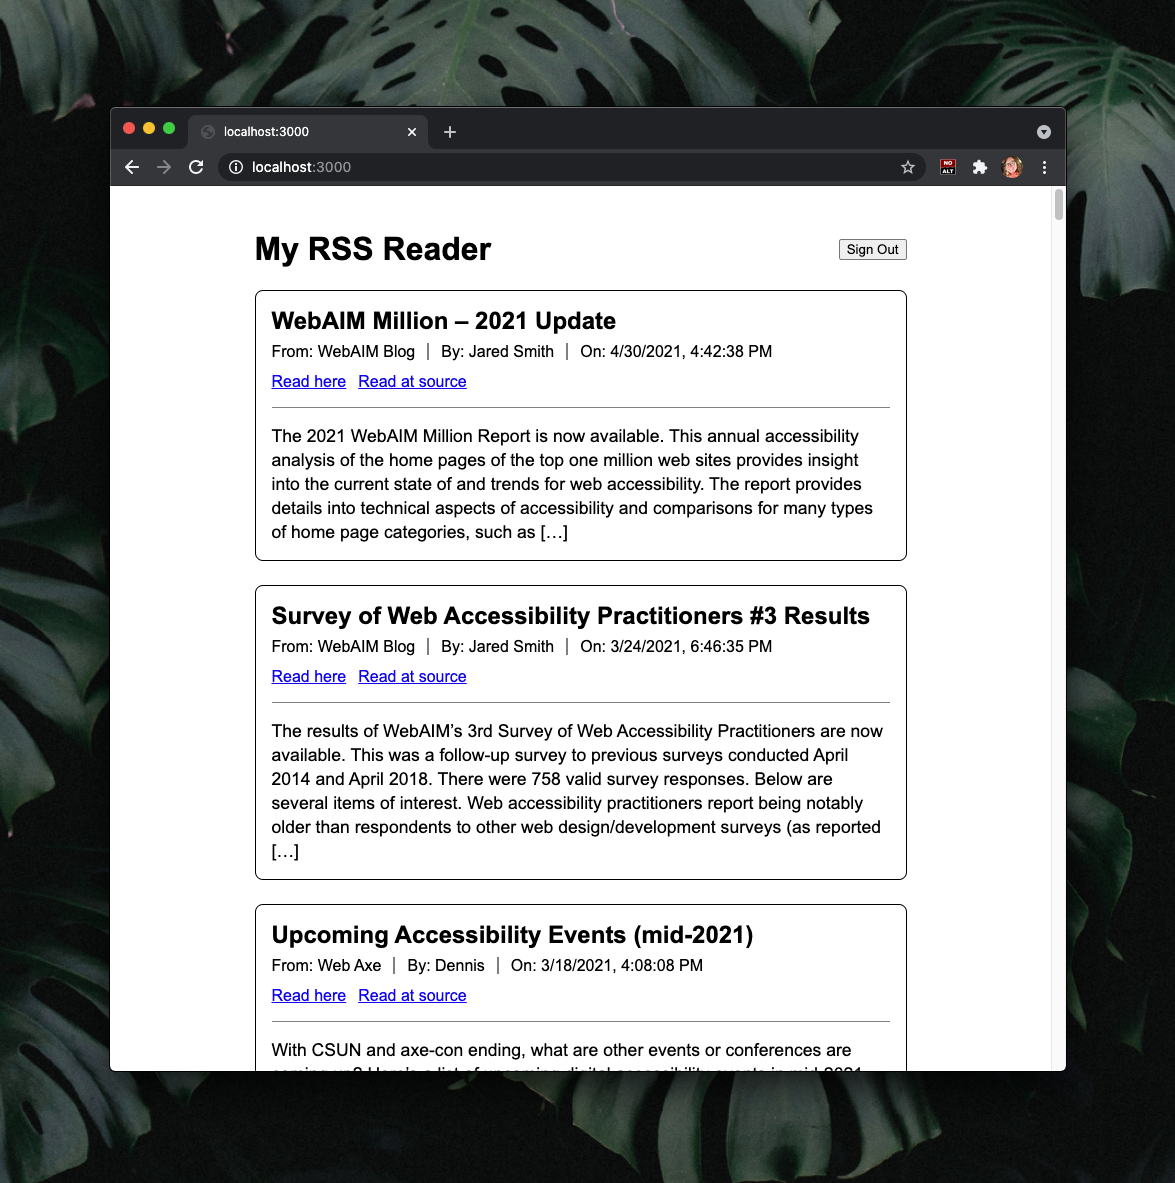 Browser window screenshot with a background of large, dark green leaves. The window shows a white webpage with black text. The title is "My RSS Reader" and there is a vertical list of articles with thin black borders. Each article first shows the title in large bold text, then the name of the feed, author, and publish date on the next line, then a horizontal rule, and lastly the article's description as HTML.